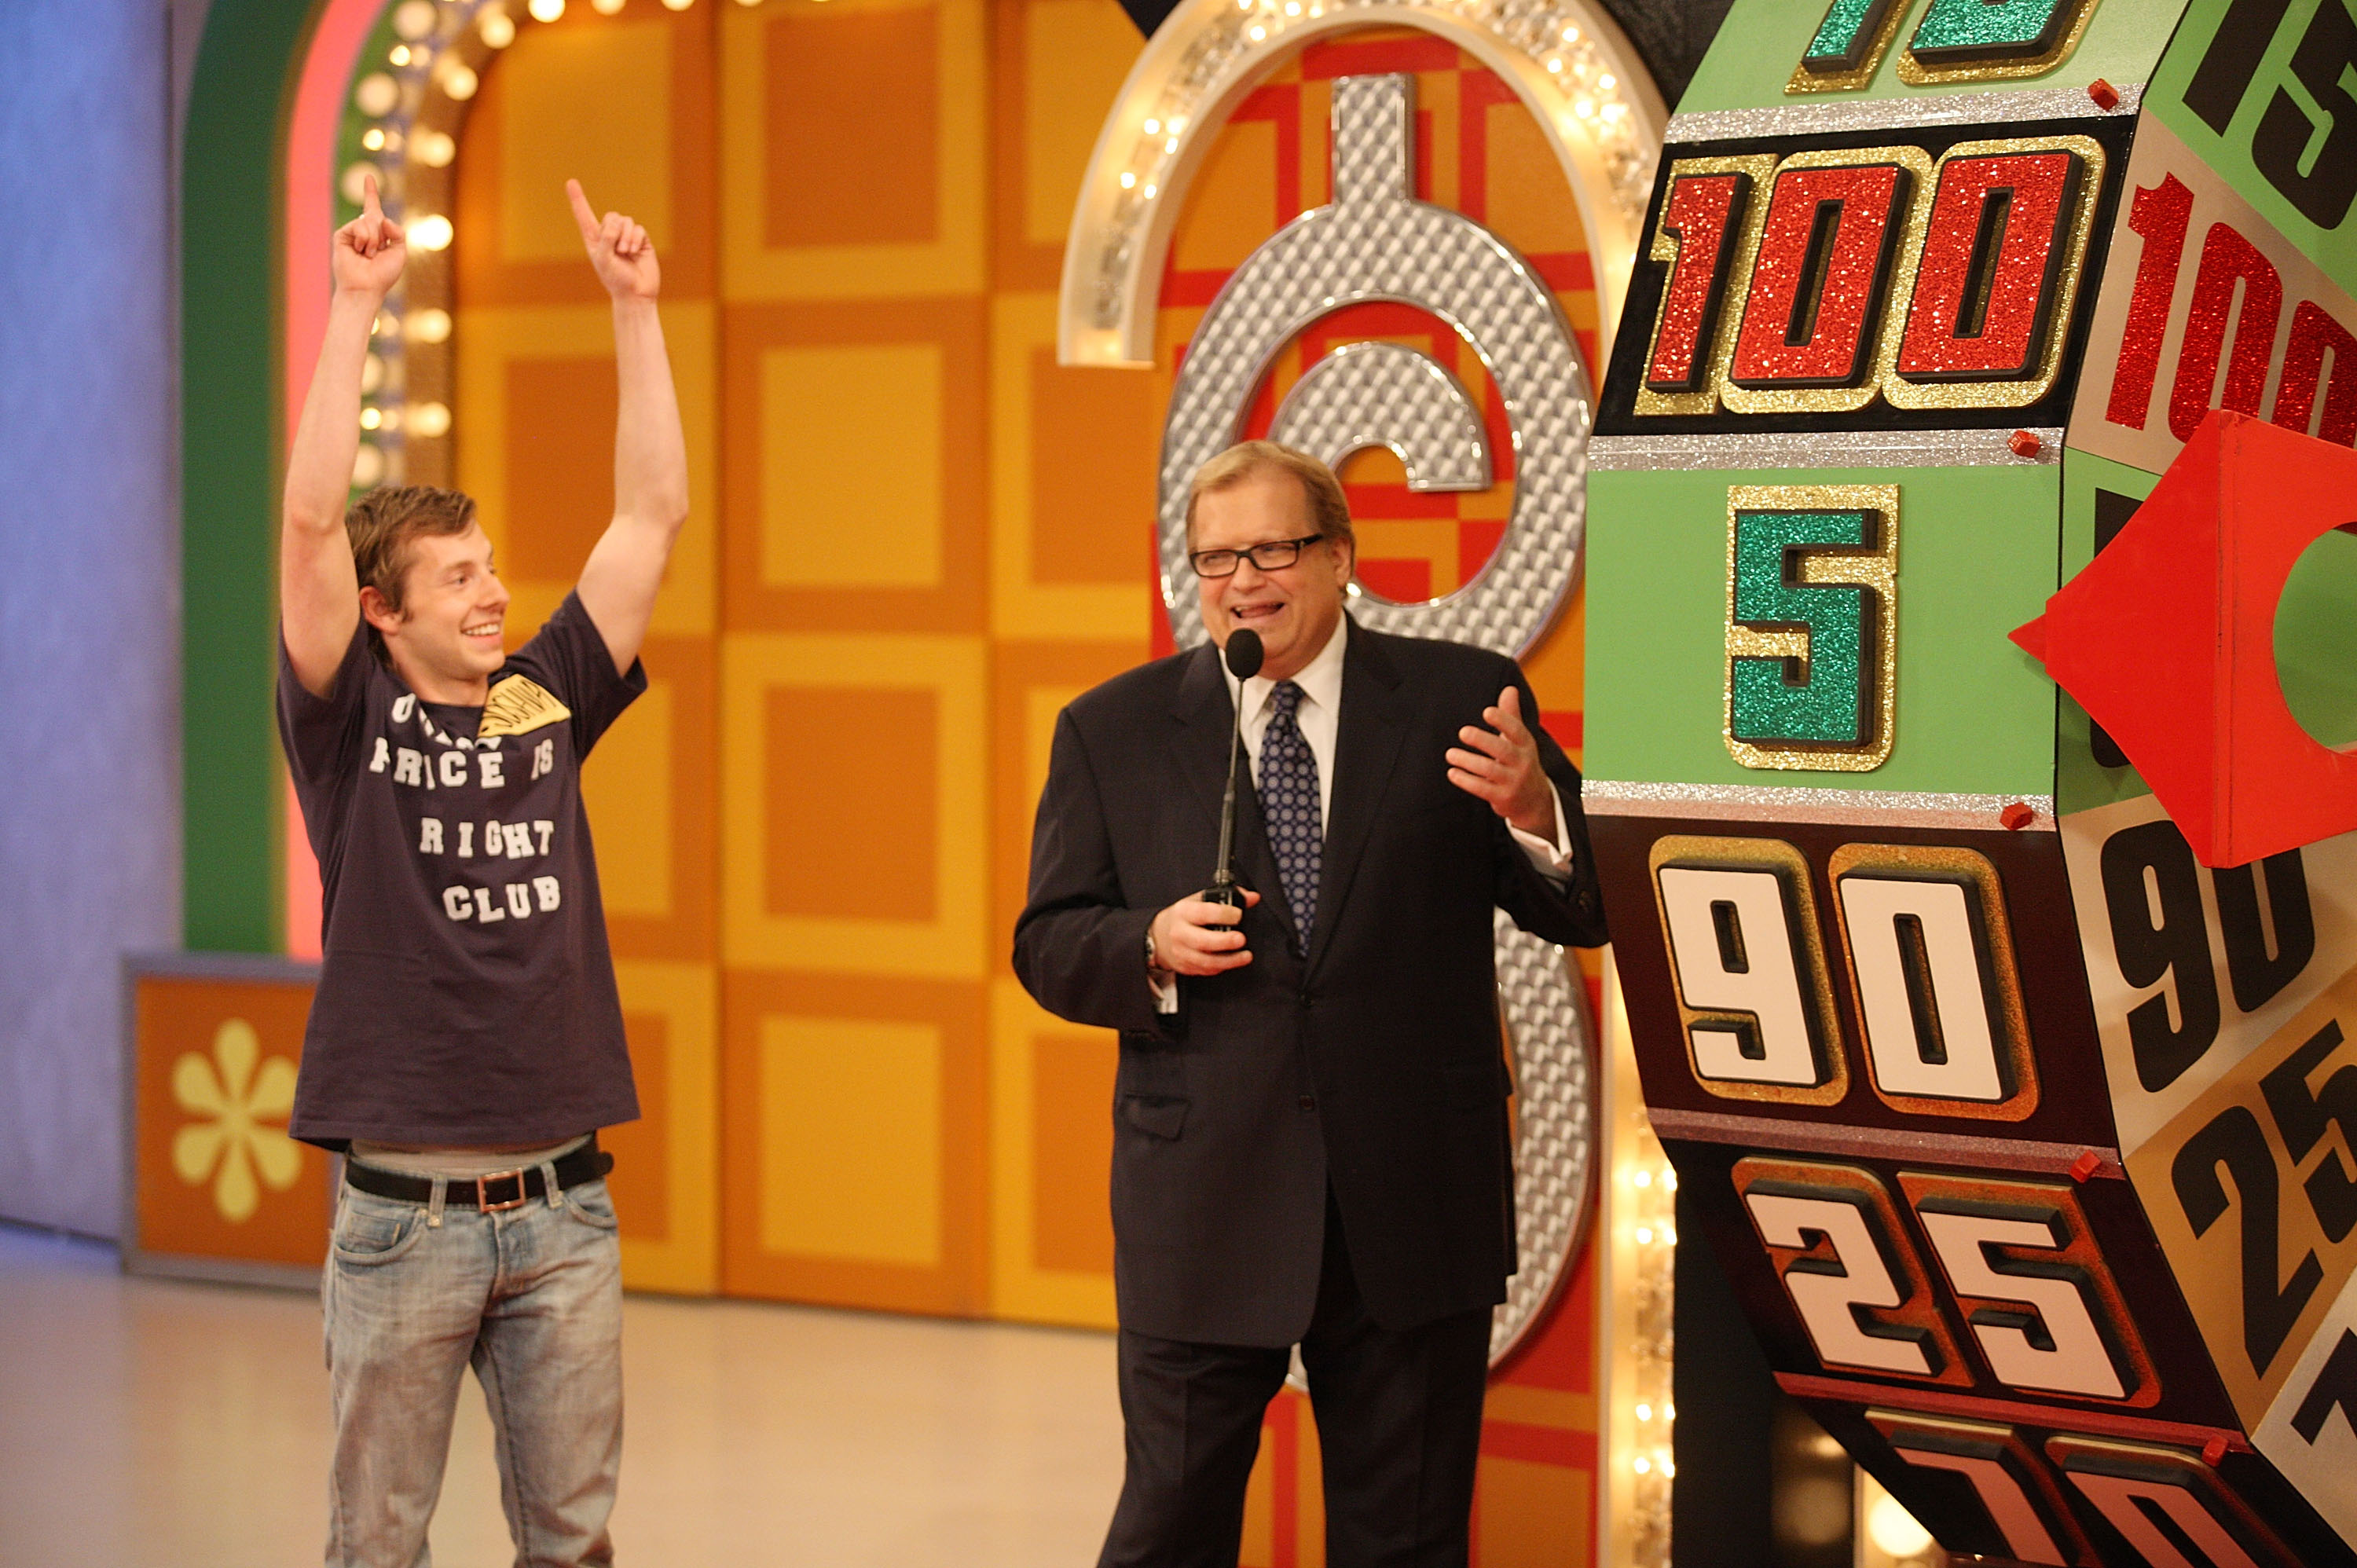 Host Drew Carey on the set of 'The Price Is Right'